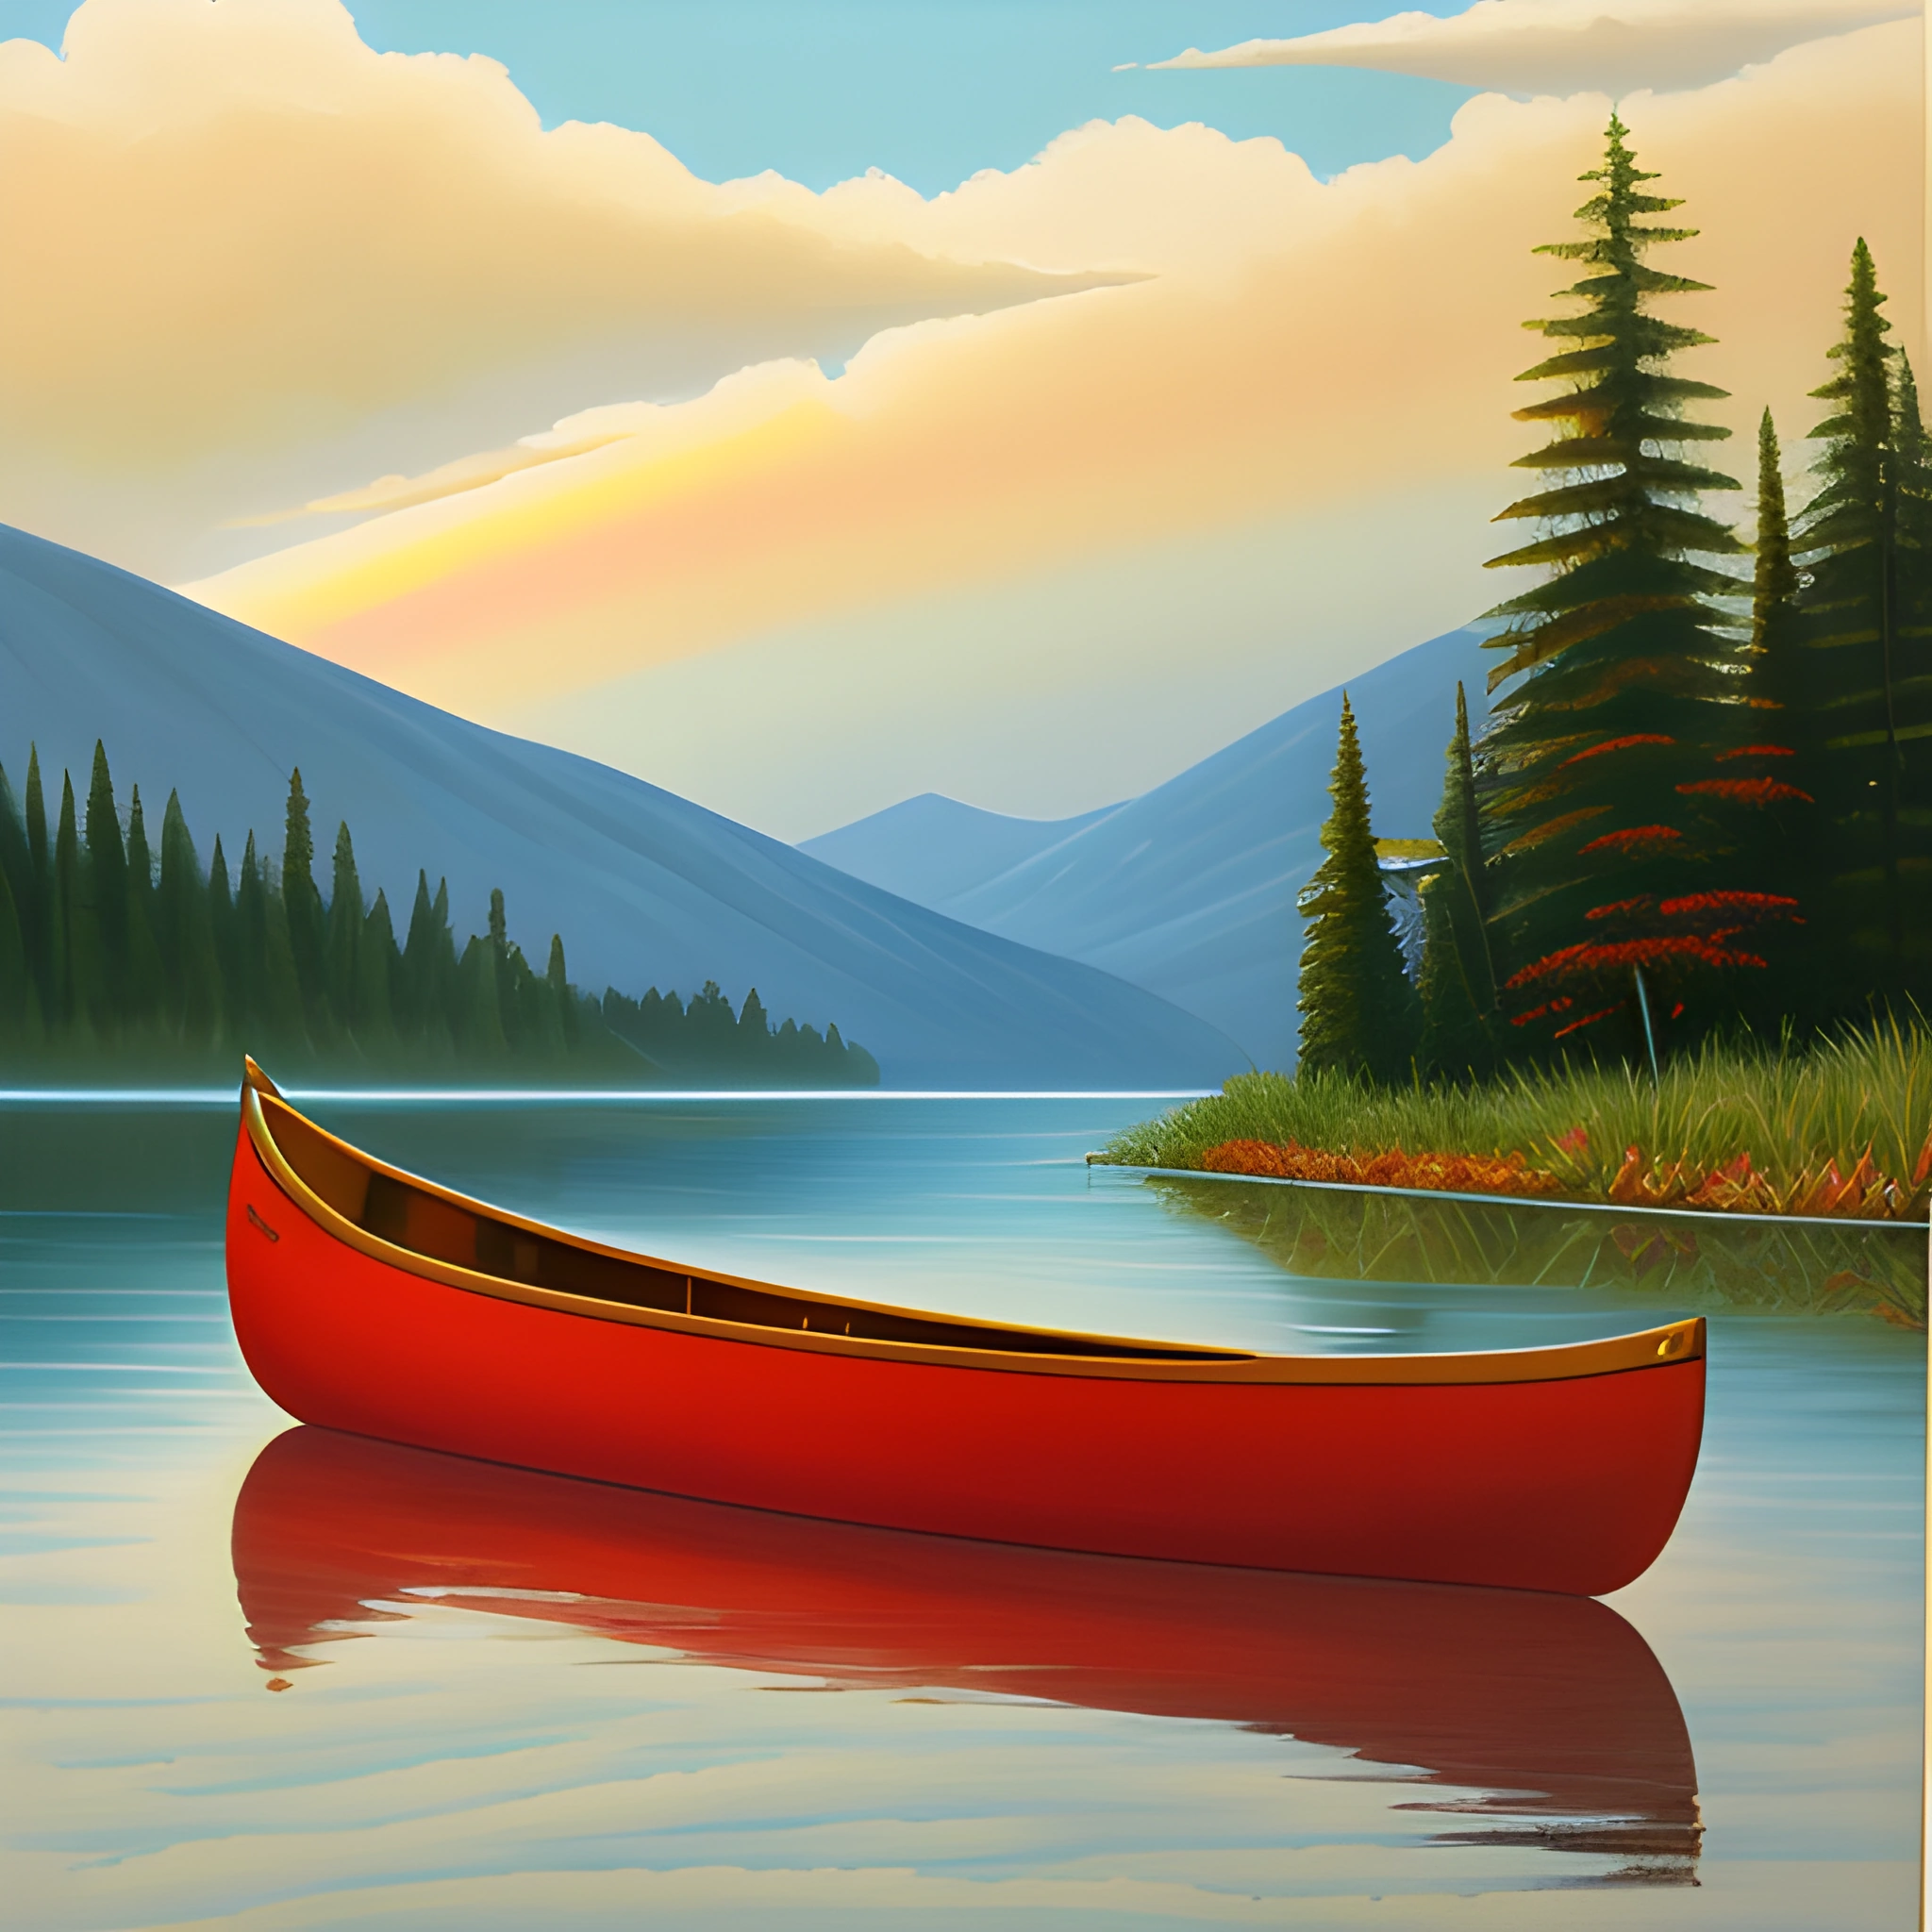 painting of a red canoe on a lake with mountains in the background